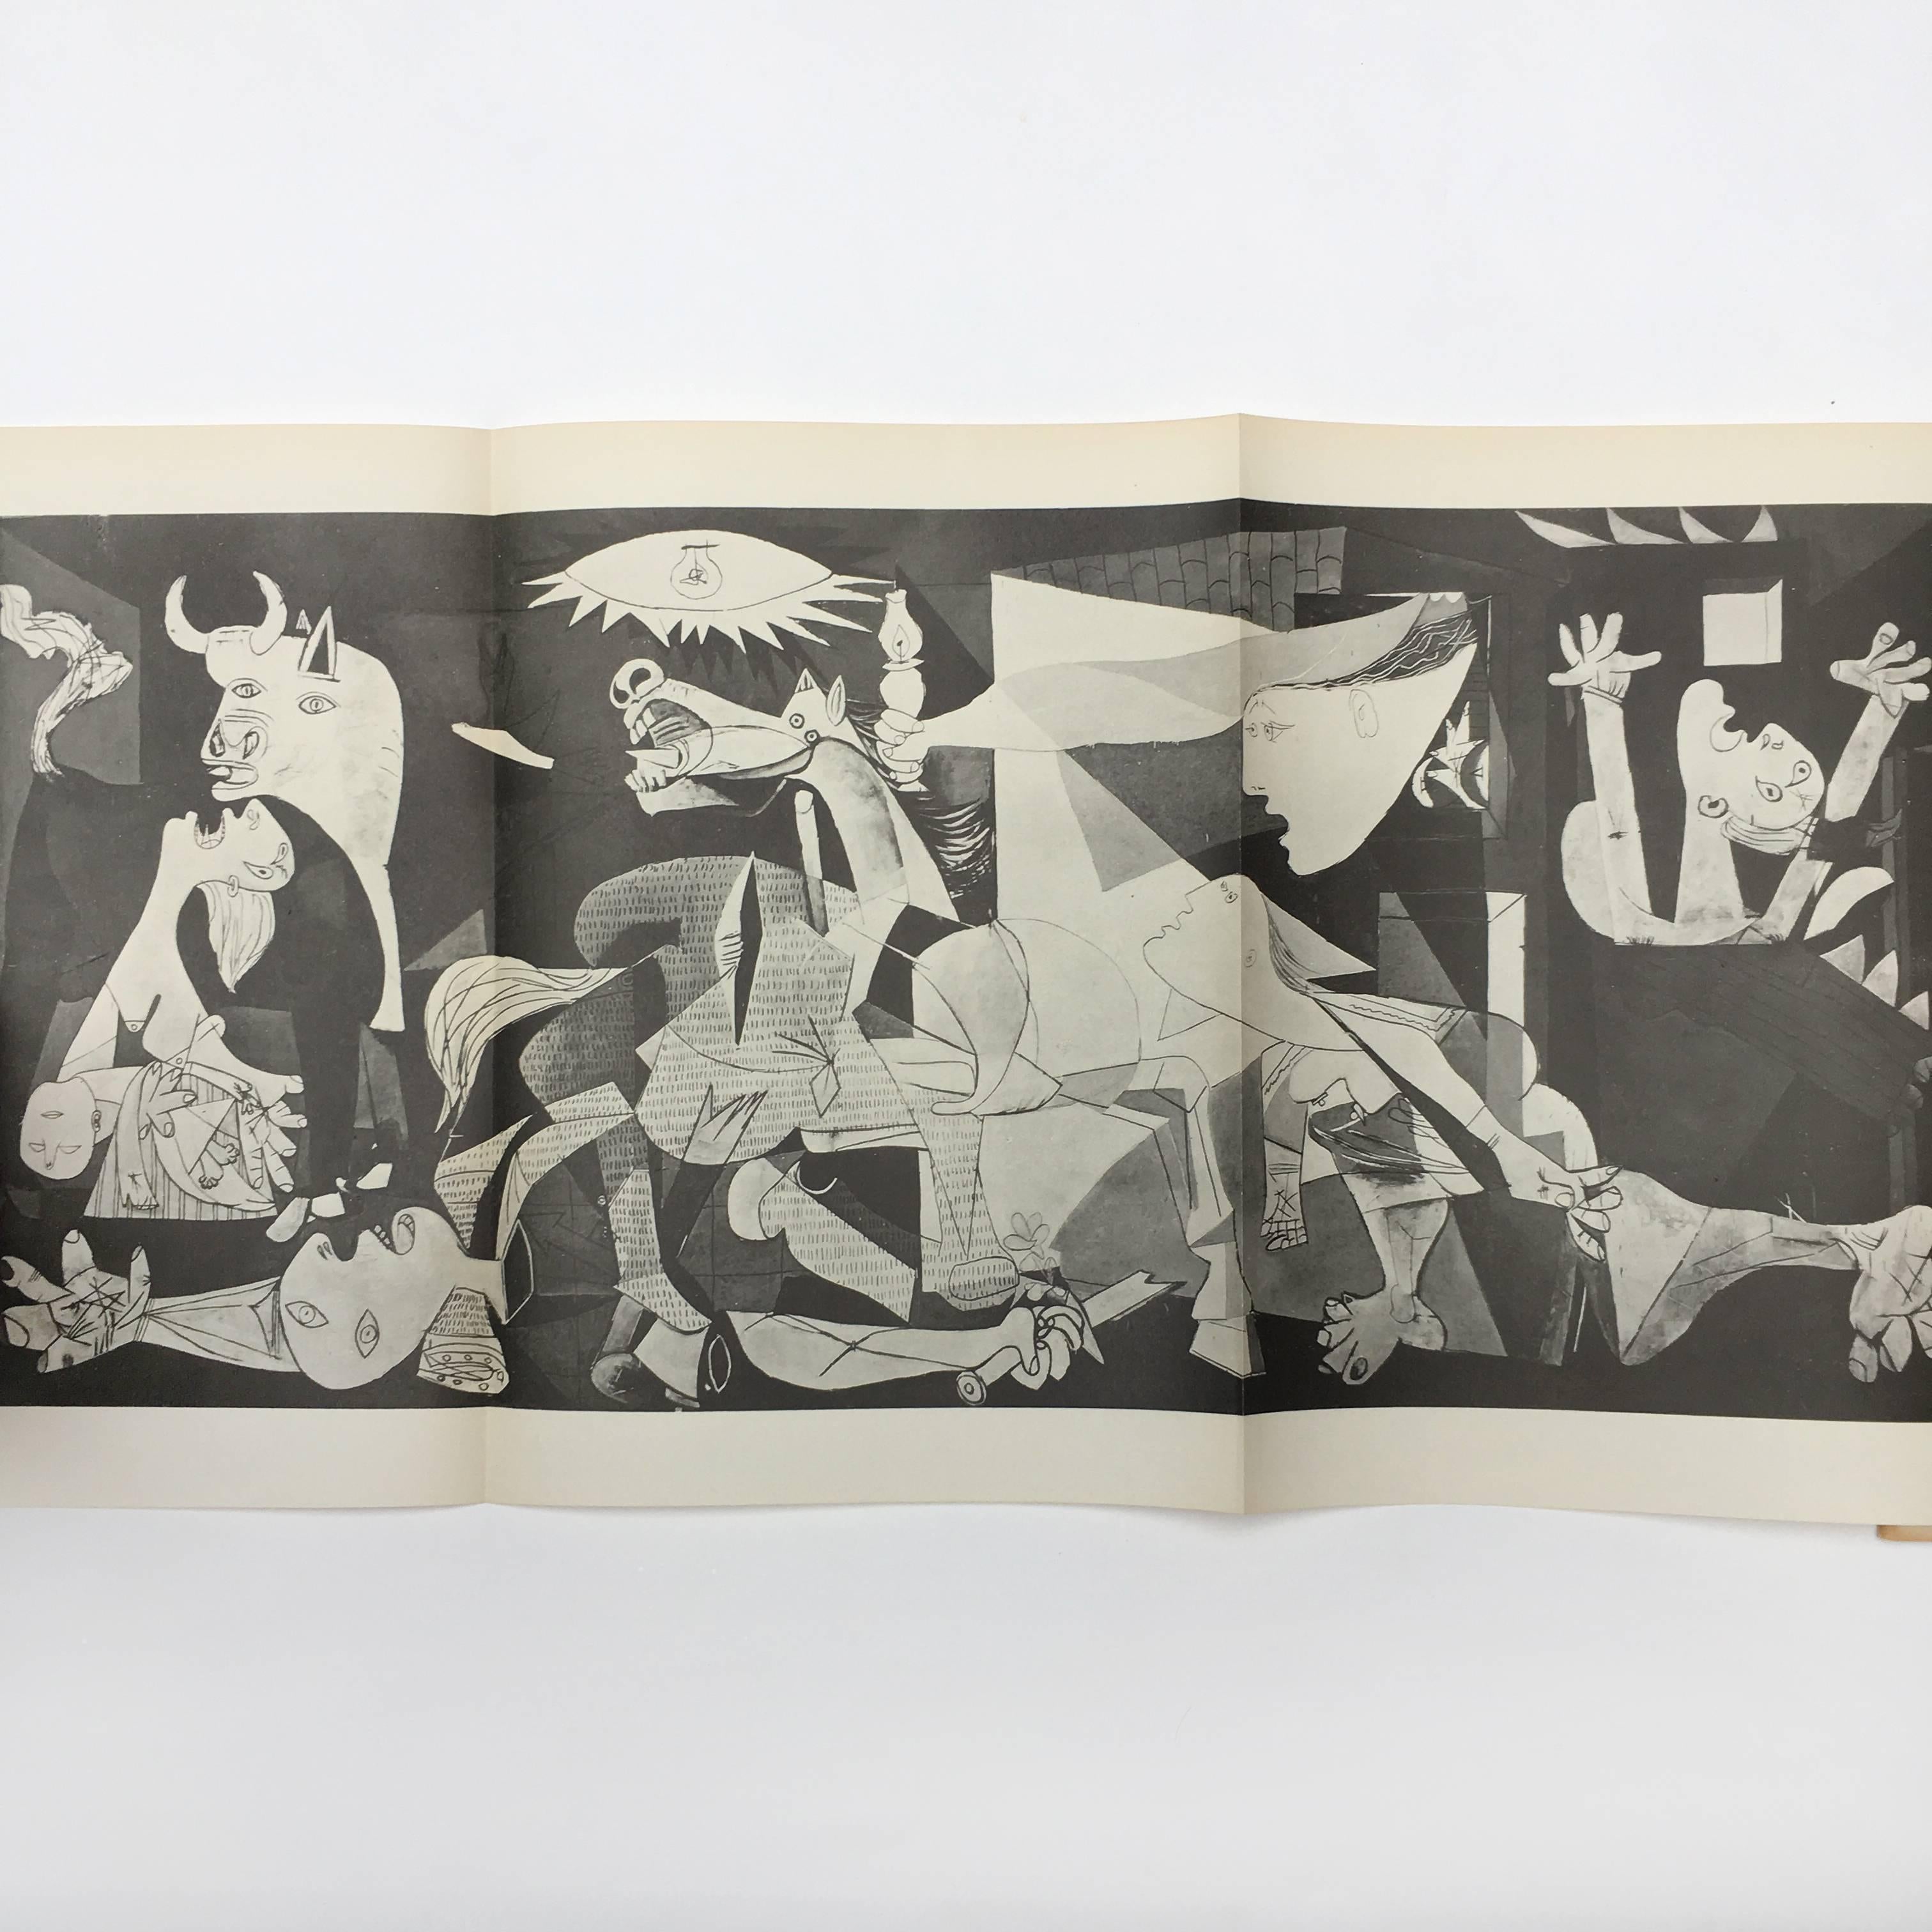 American Picasso, Guernica, First Edition, 1947